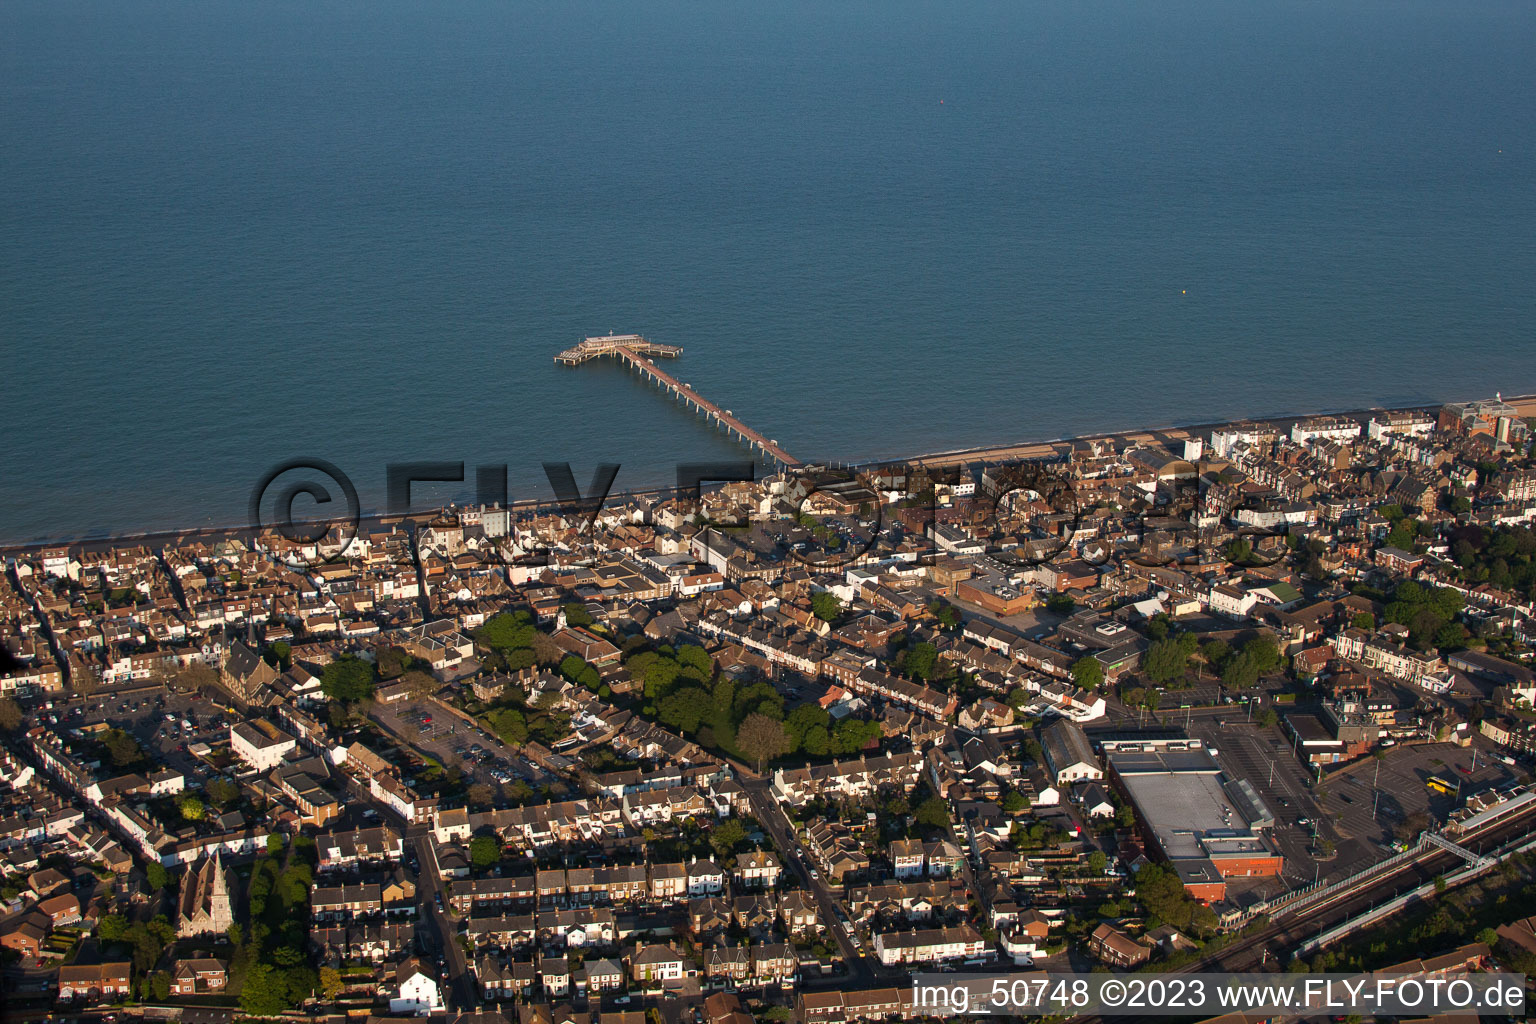 Deal in the state England, Great Britain from above